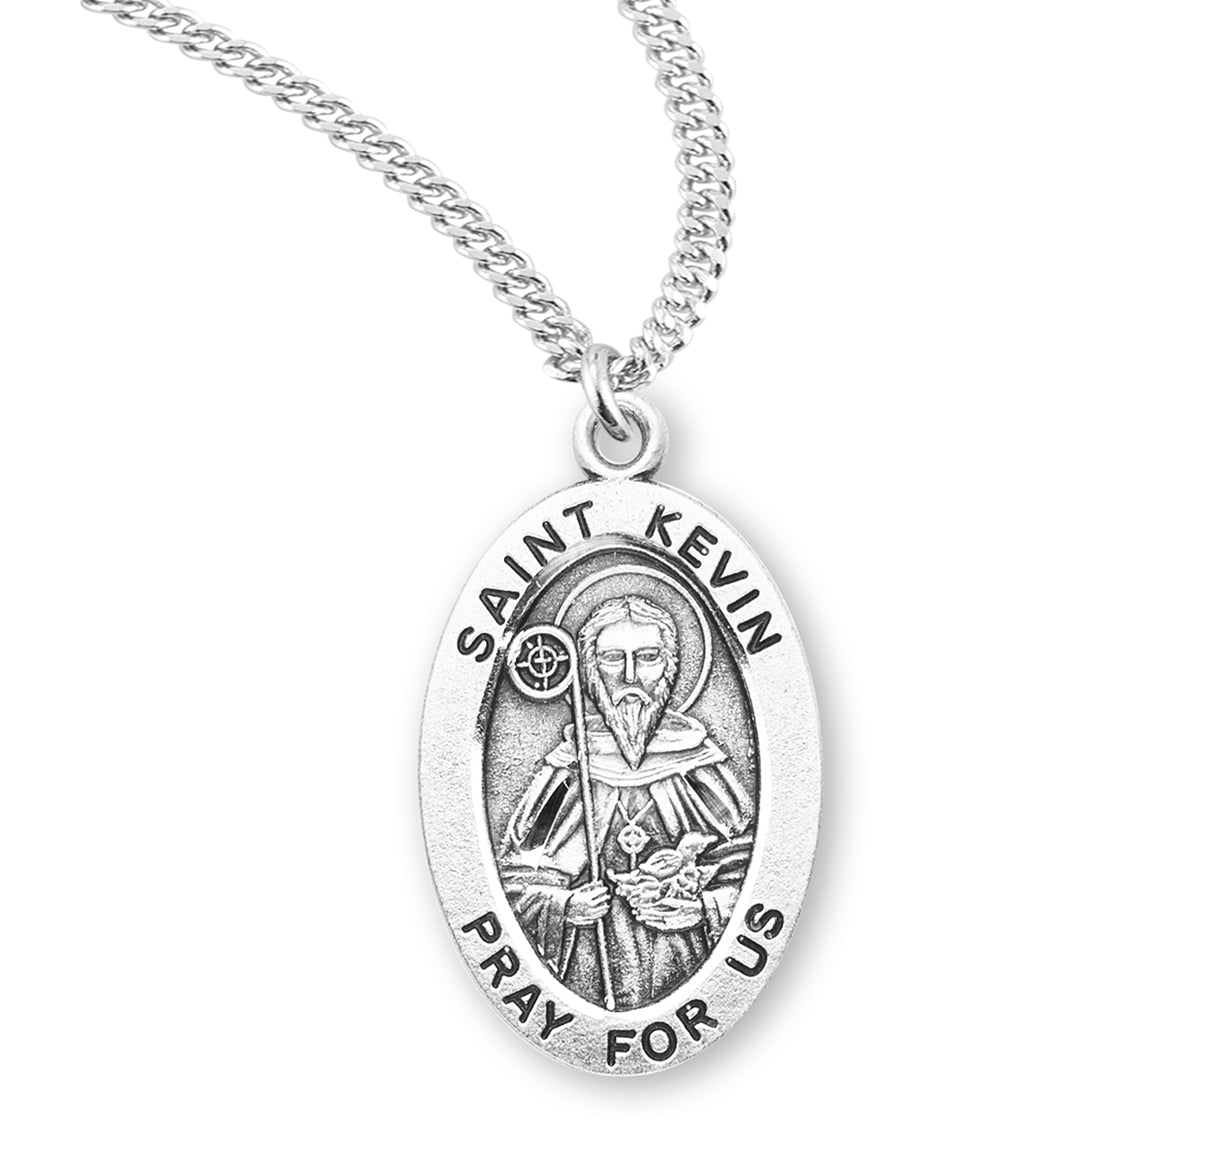 Patron Saint Kevin Oval Sterling Silver Medal